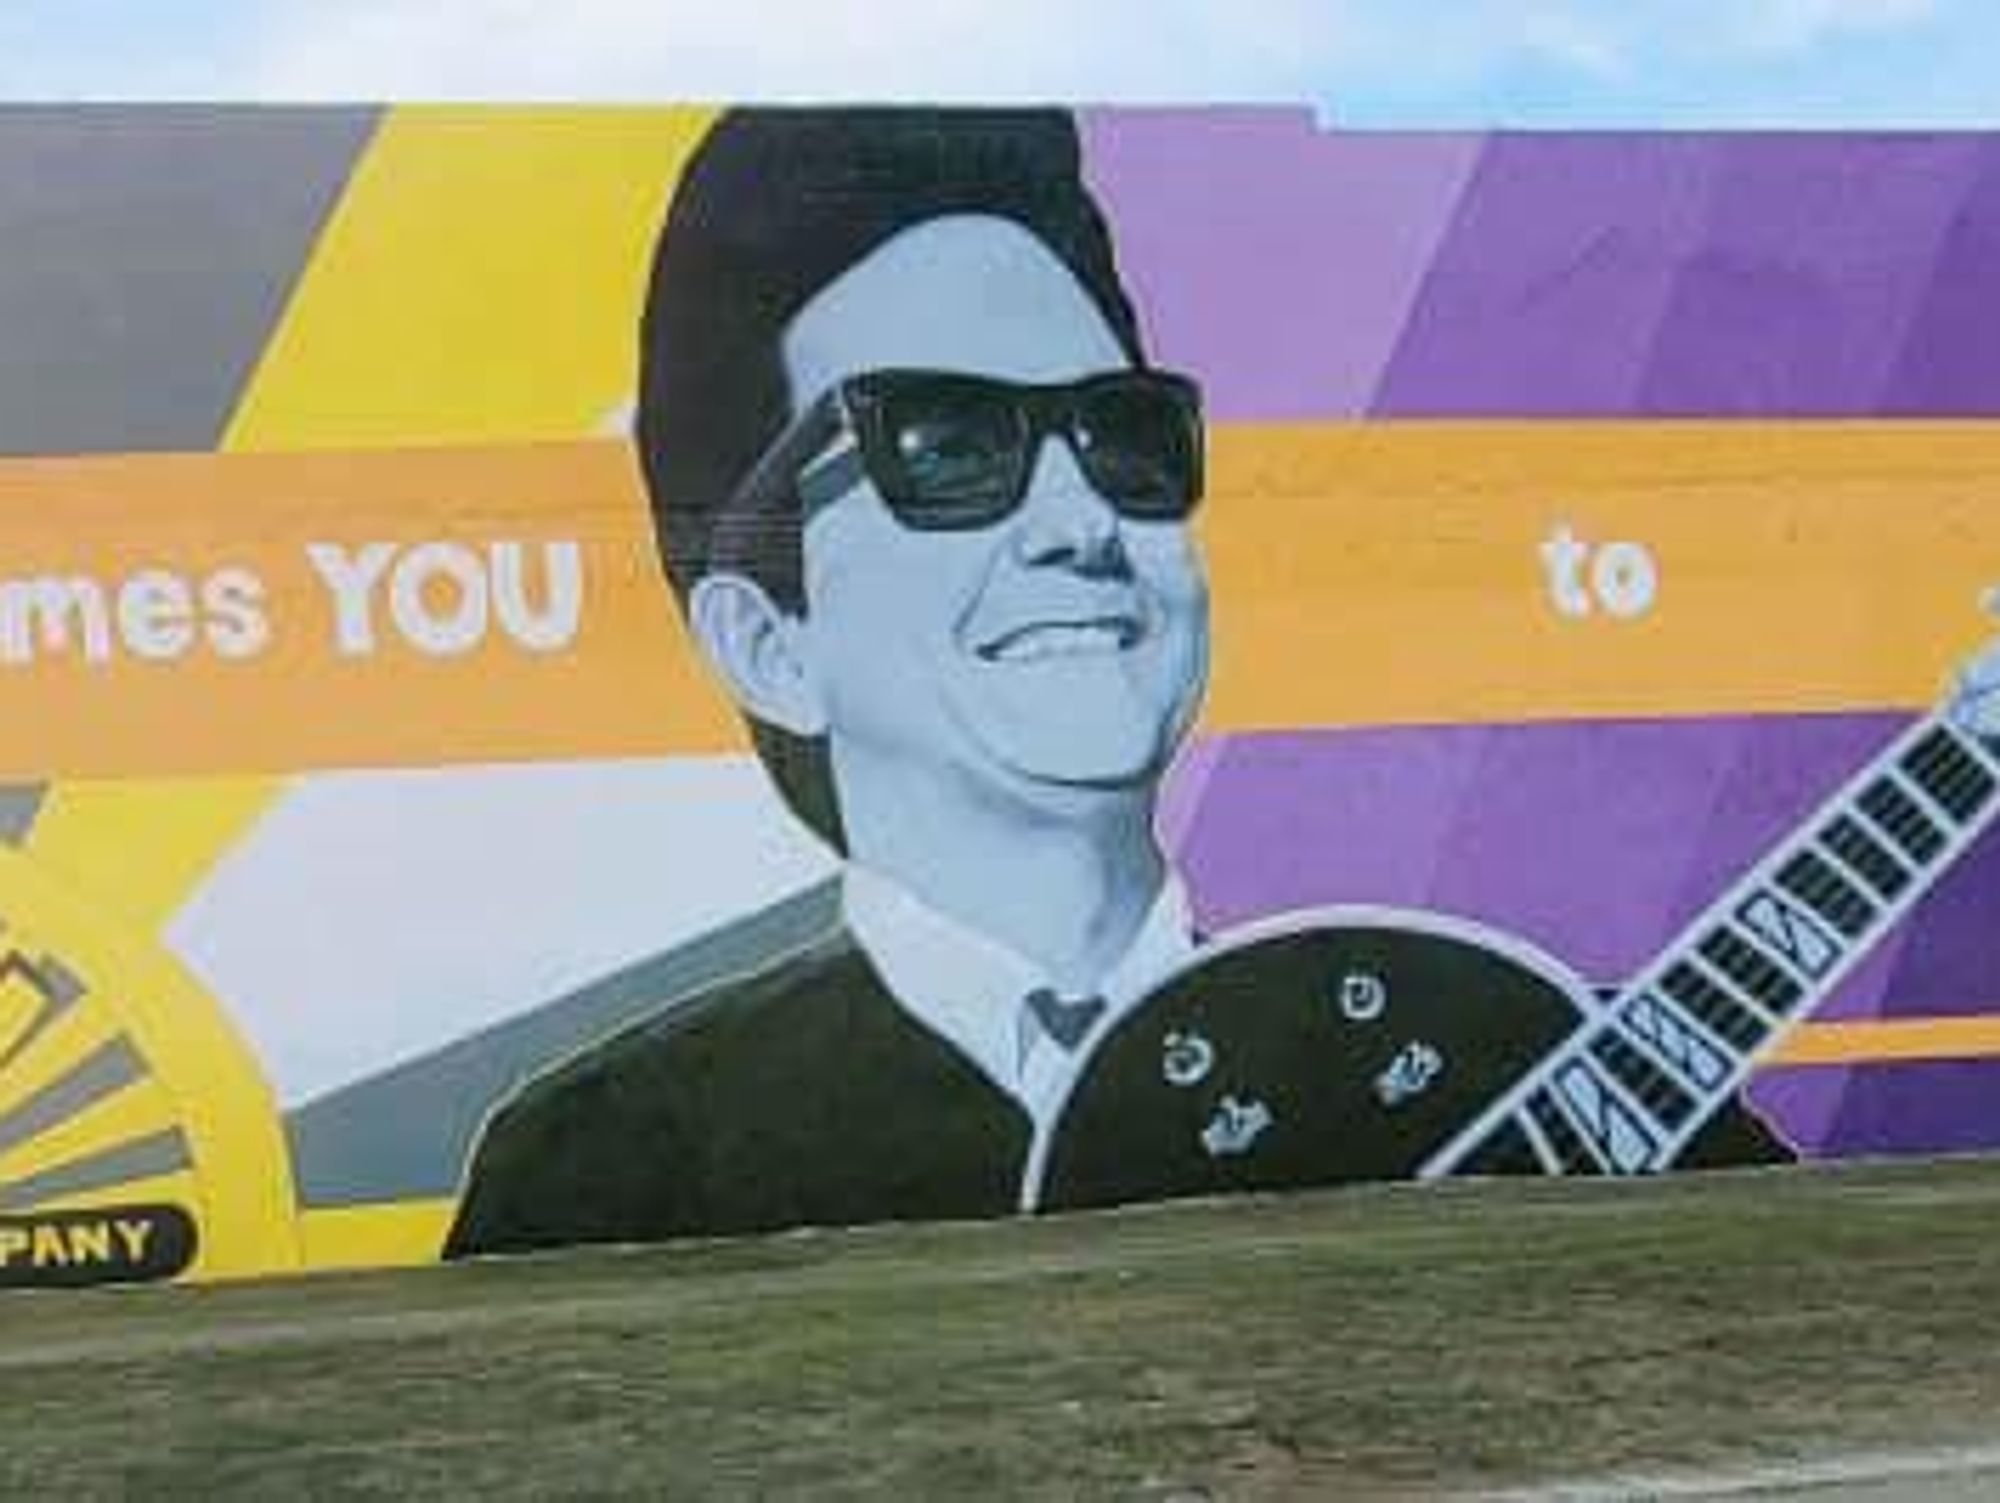 Vernon is the birthplace of rock-and-roll legend Roy Orbison.